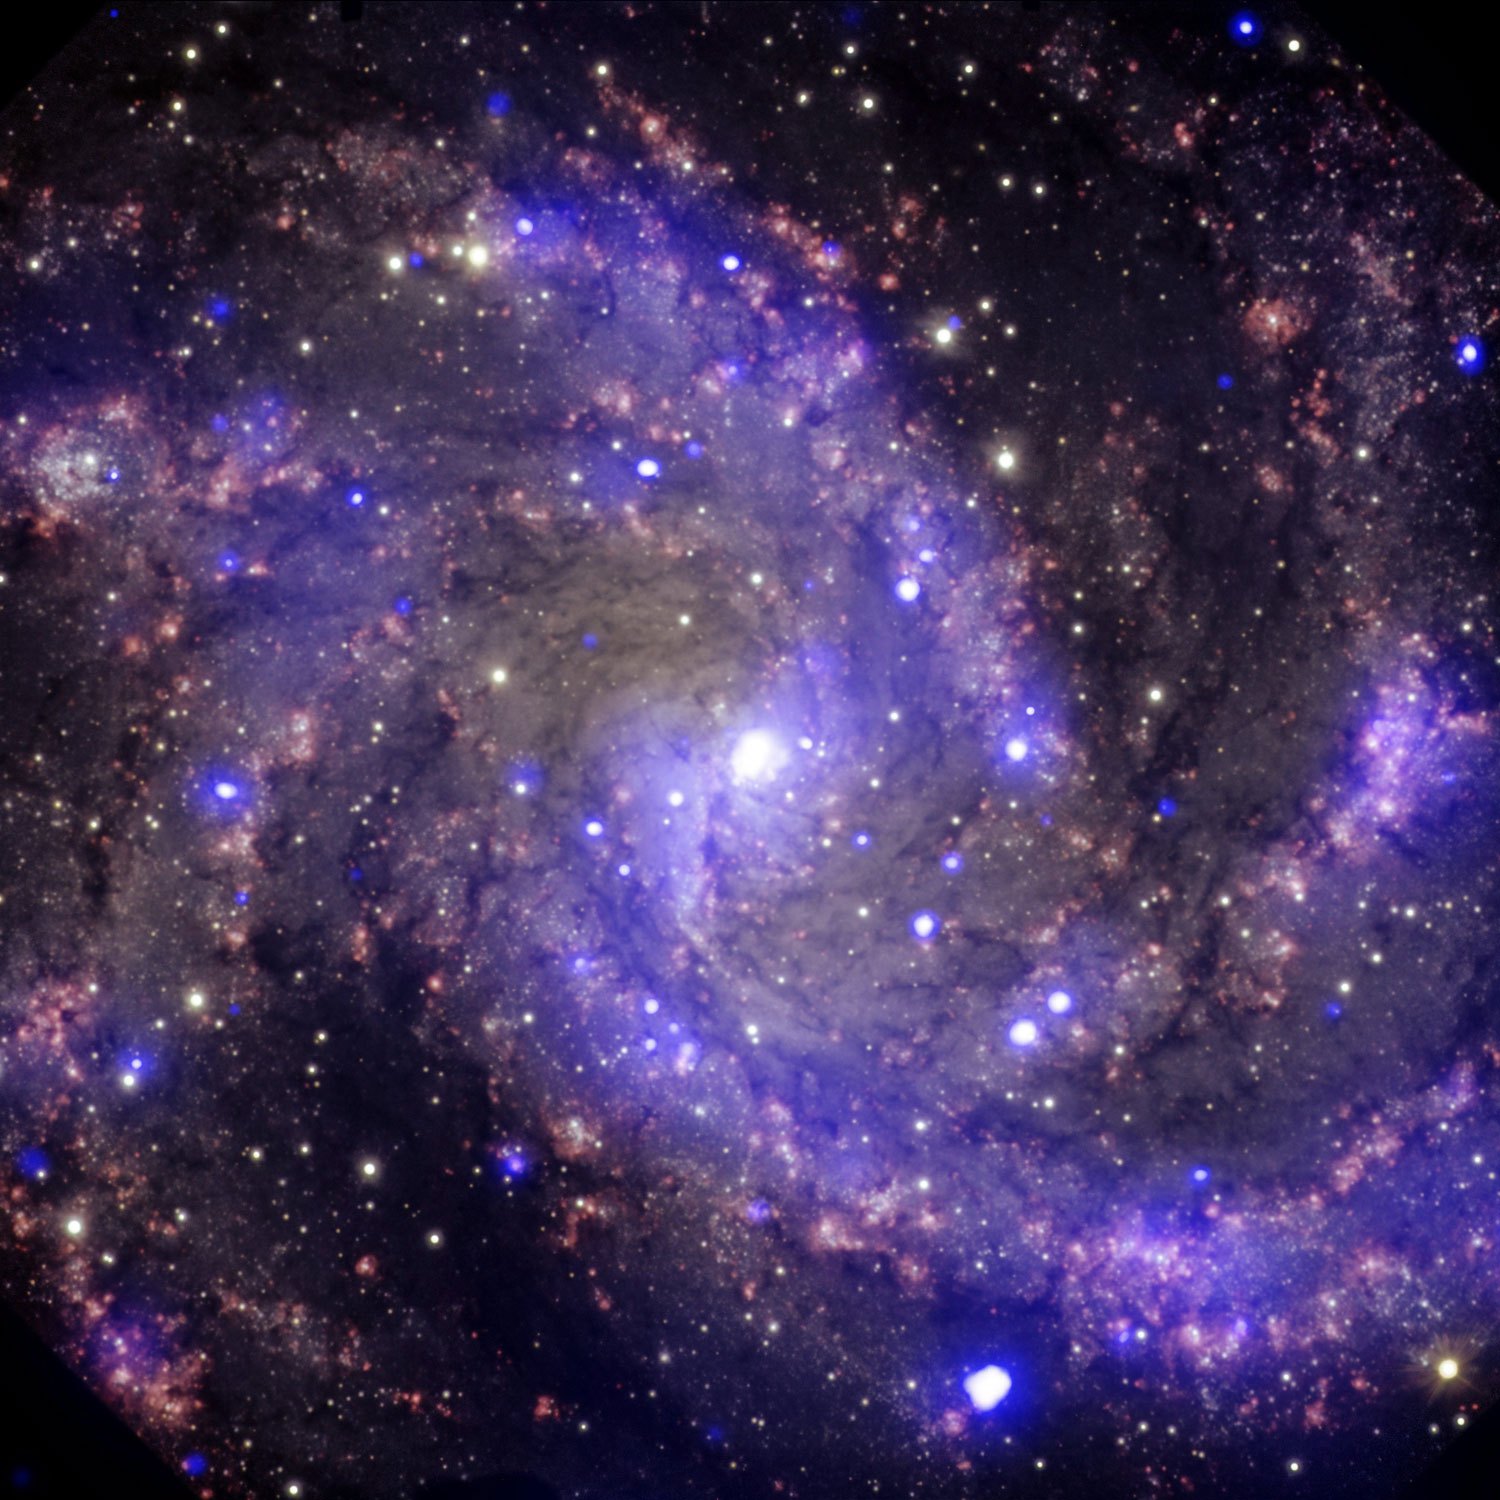 The NGC 6946 medium-sized, face-on spiral galaxy which is about 22 million light years away from Earth, as seen on Nov. 8, 2013. In the past century, eight supernovas have been observed to explode in the arms of NGC 6946. The galaxy's less technical—more memorable—name? The Fireworks Galaxy.